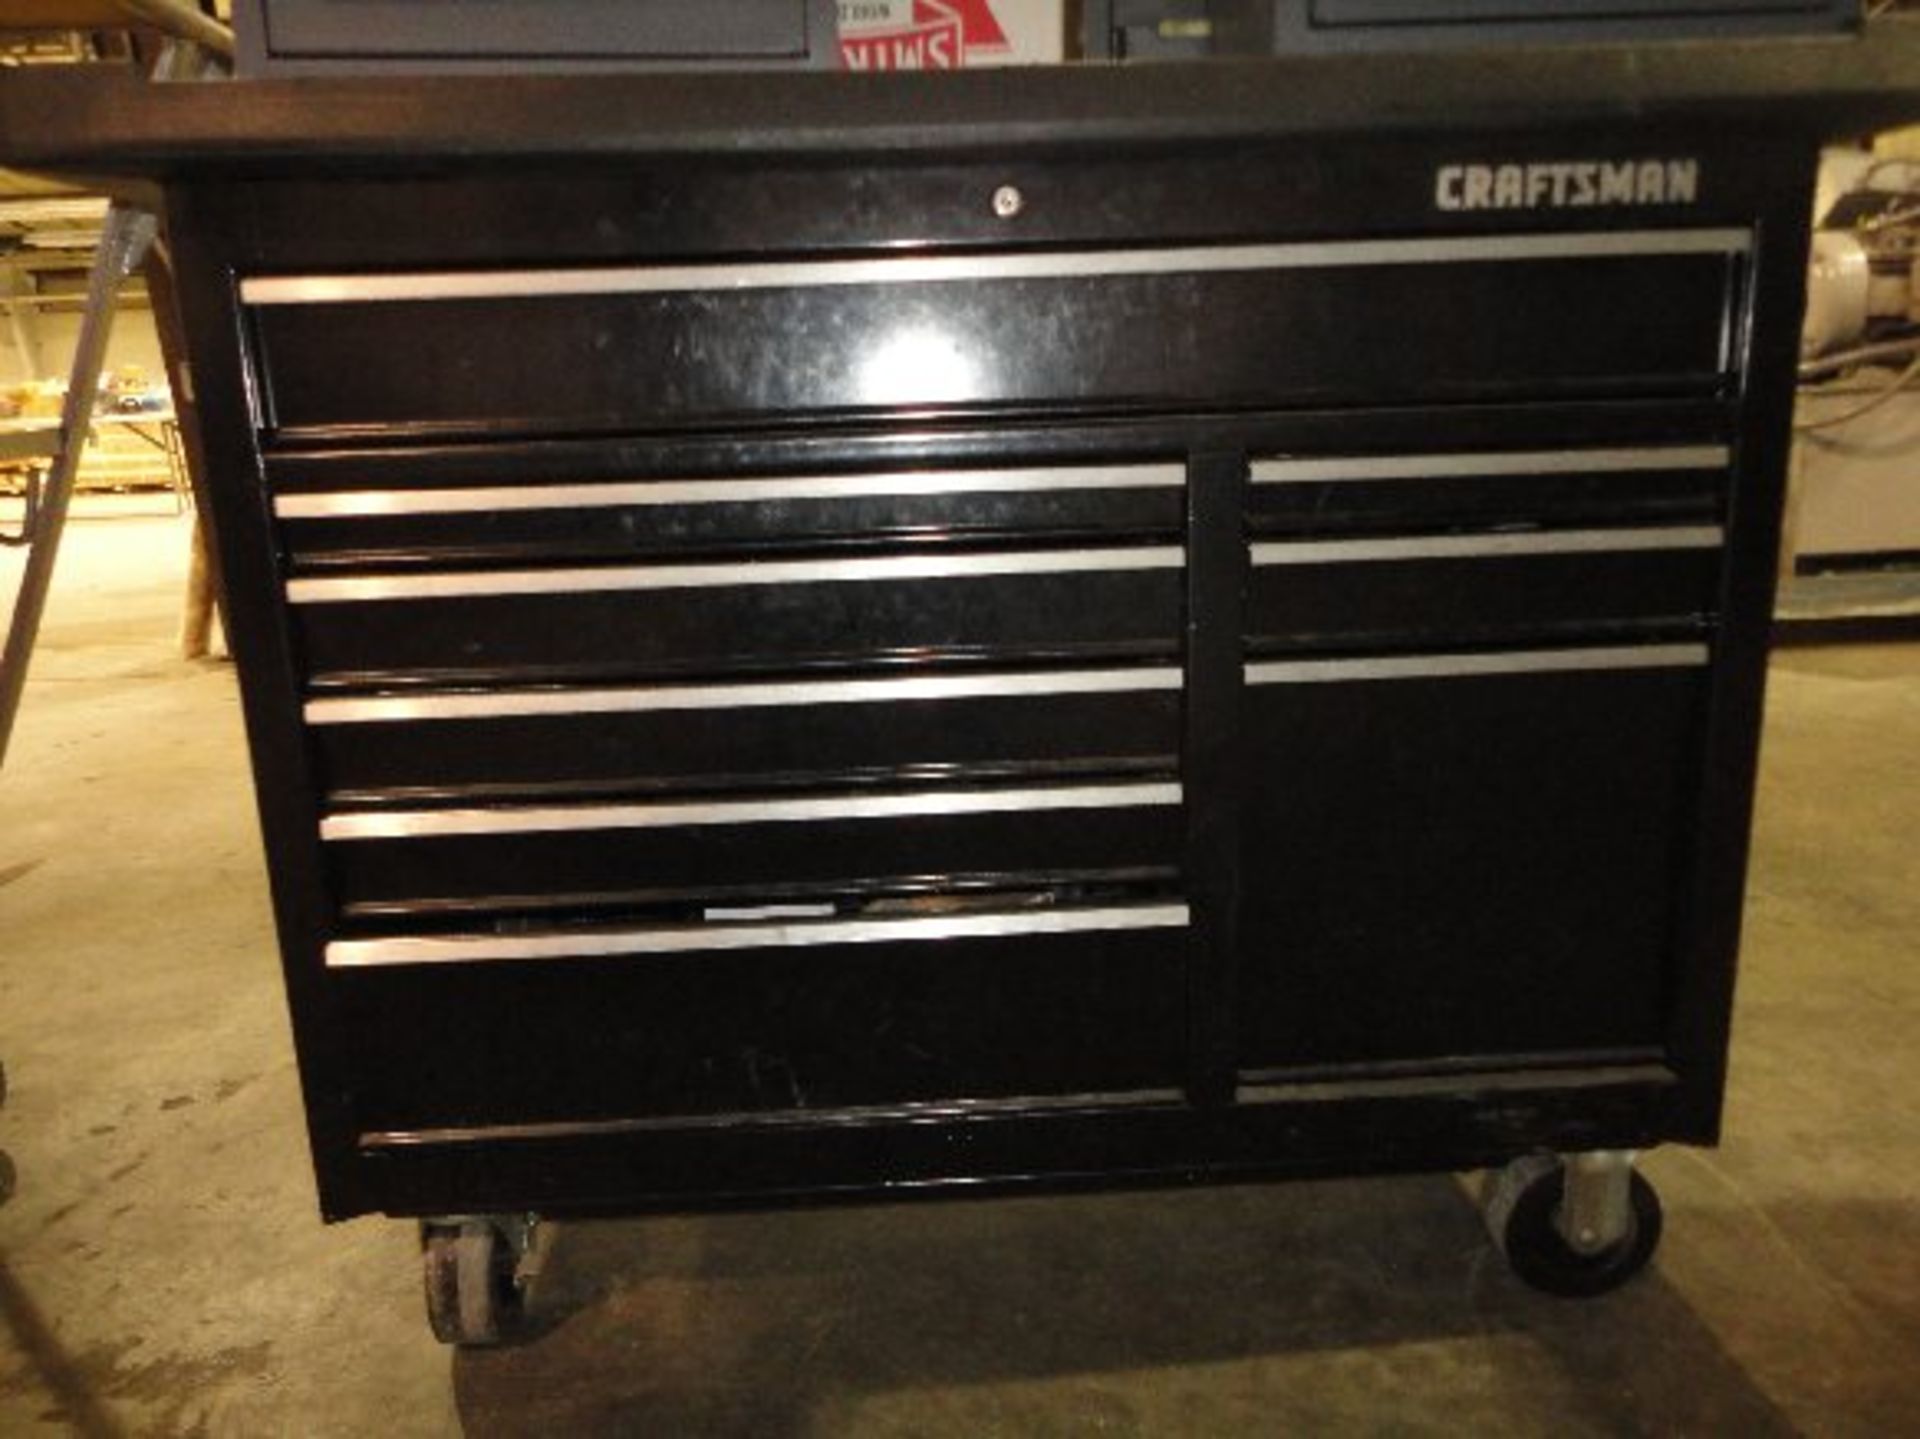 CRAFTSMAN 9-DRAWER TOOL BOX ON CASTERS